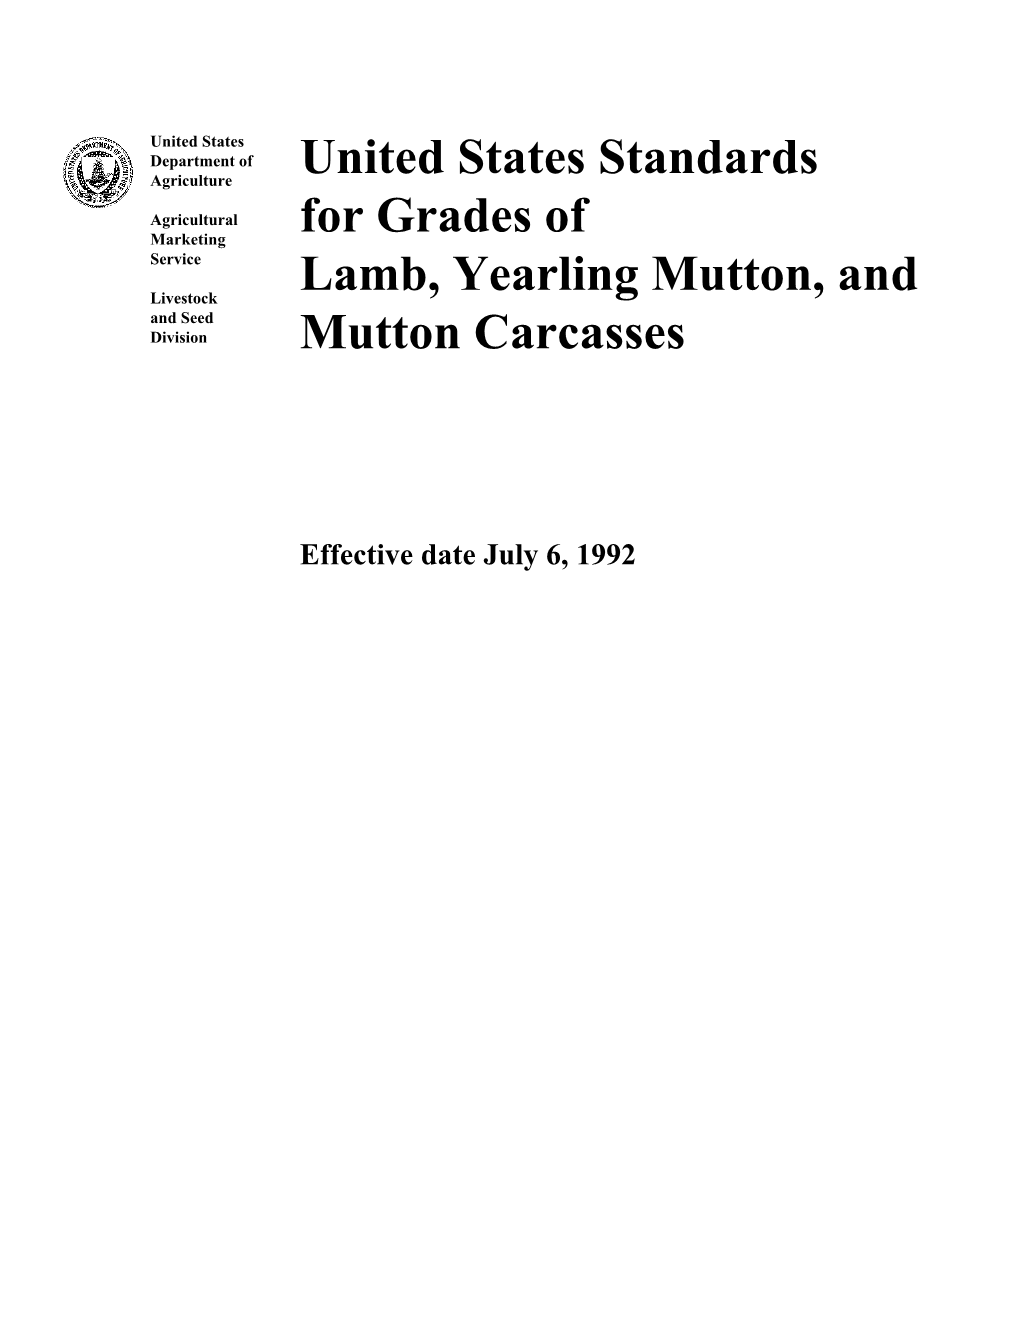 United States Standards for Grades of Lamb, Yearling Mutton, and Mutton Carcasses